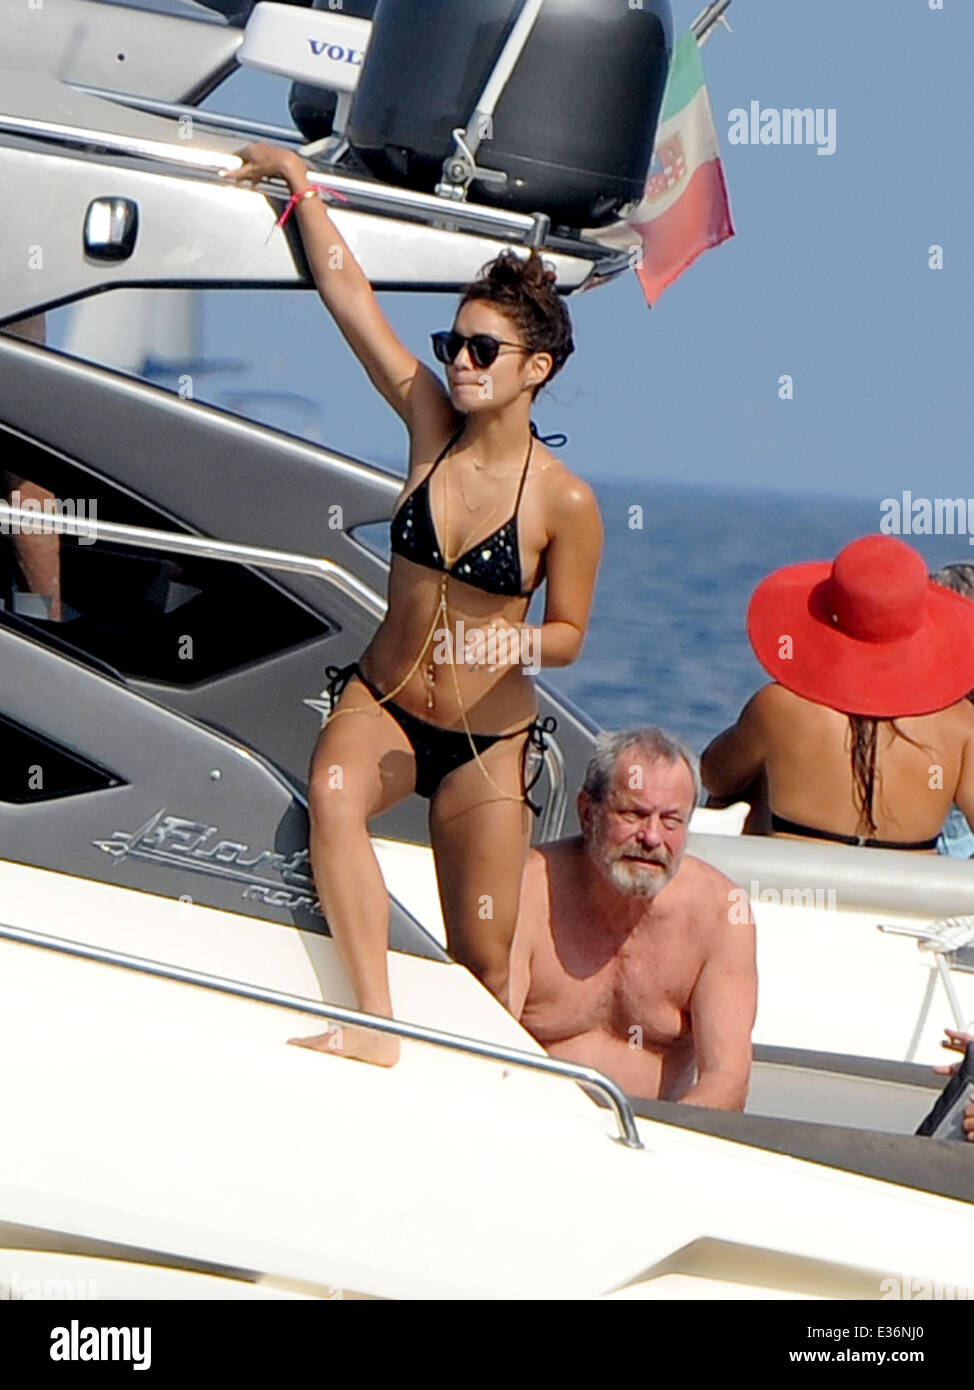 Vanessa Hudgens spends time on a boat with friends, including film directors Eli Roth and Terry Gilliam.  Featuring: Vanessa Hudgens,Terry Gilliam Where: Ischia, Italy When: 19 Jul 2013 Stock Photo